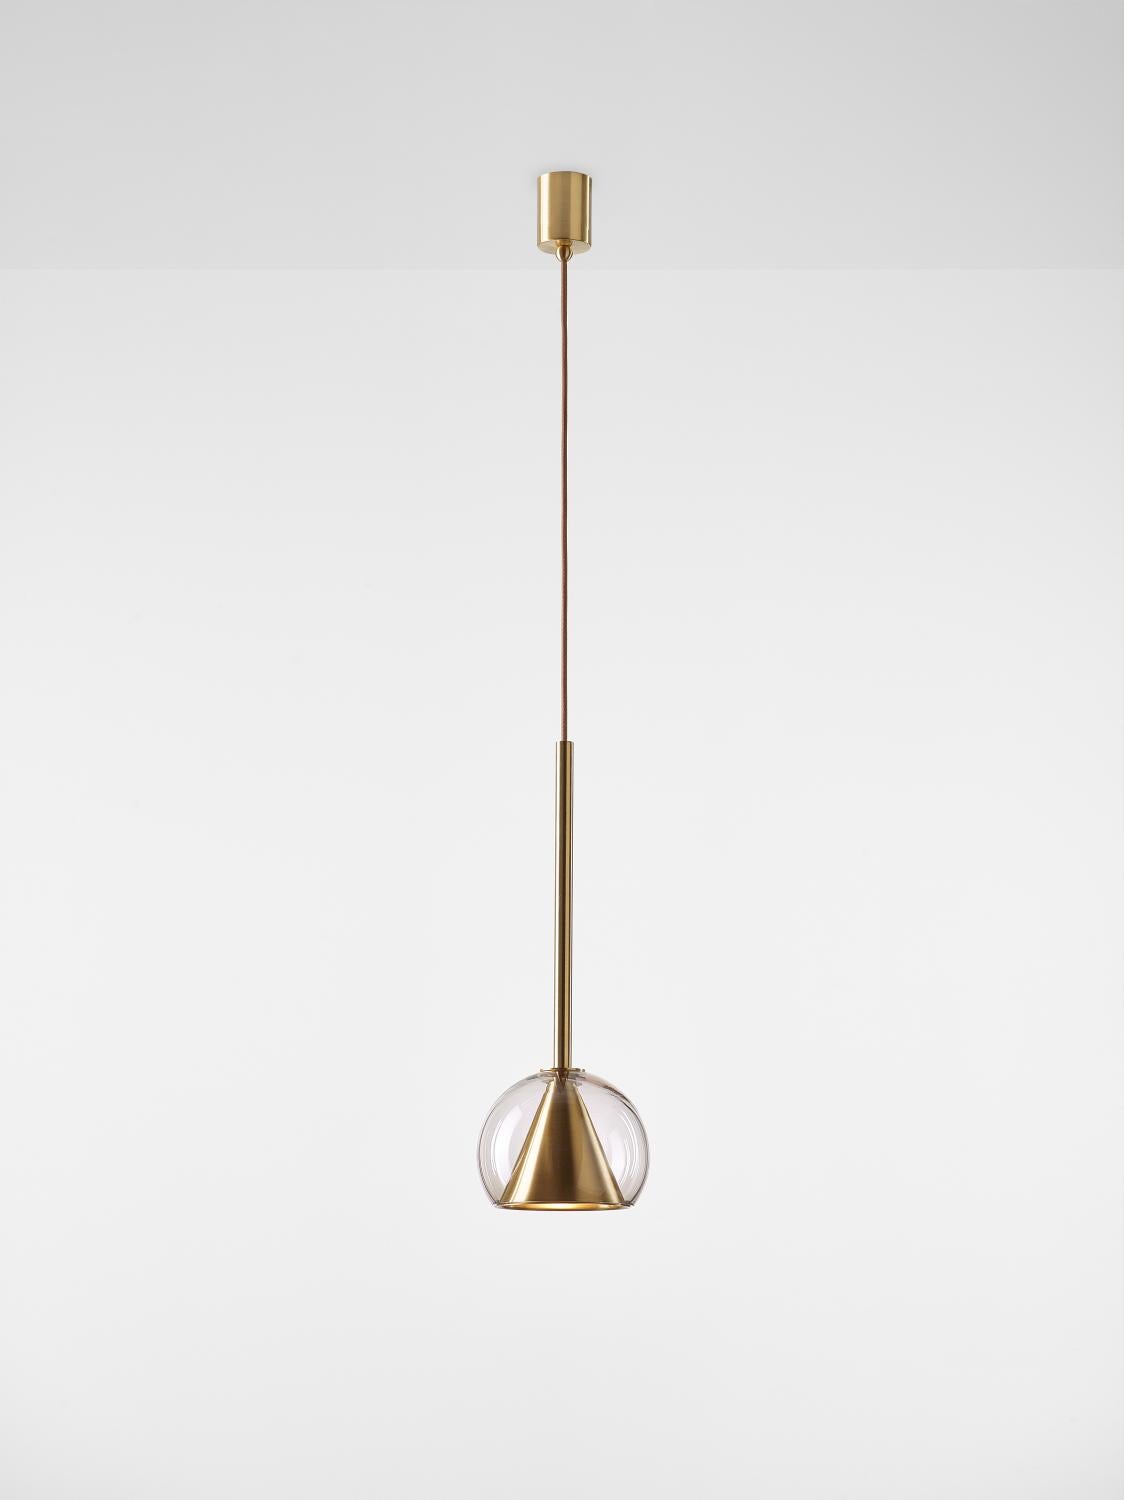 Small Crystal Clear Kono pendant light by Dechem Studio
Dimensions: D 19 x H 52 cm
Materials: Brass, Glass.
Also Available: Different finishes and colours available.

This collection of suspended light fixtures combines the elementary geometric